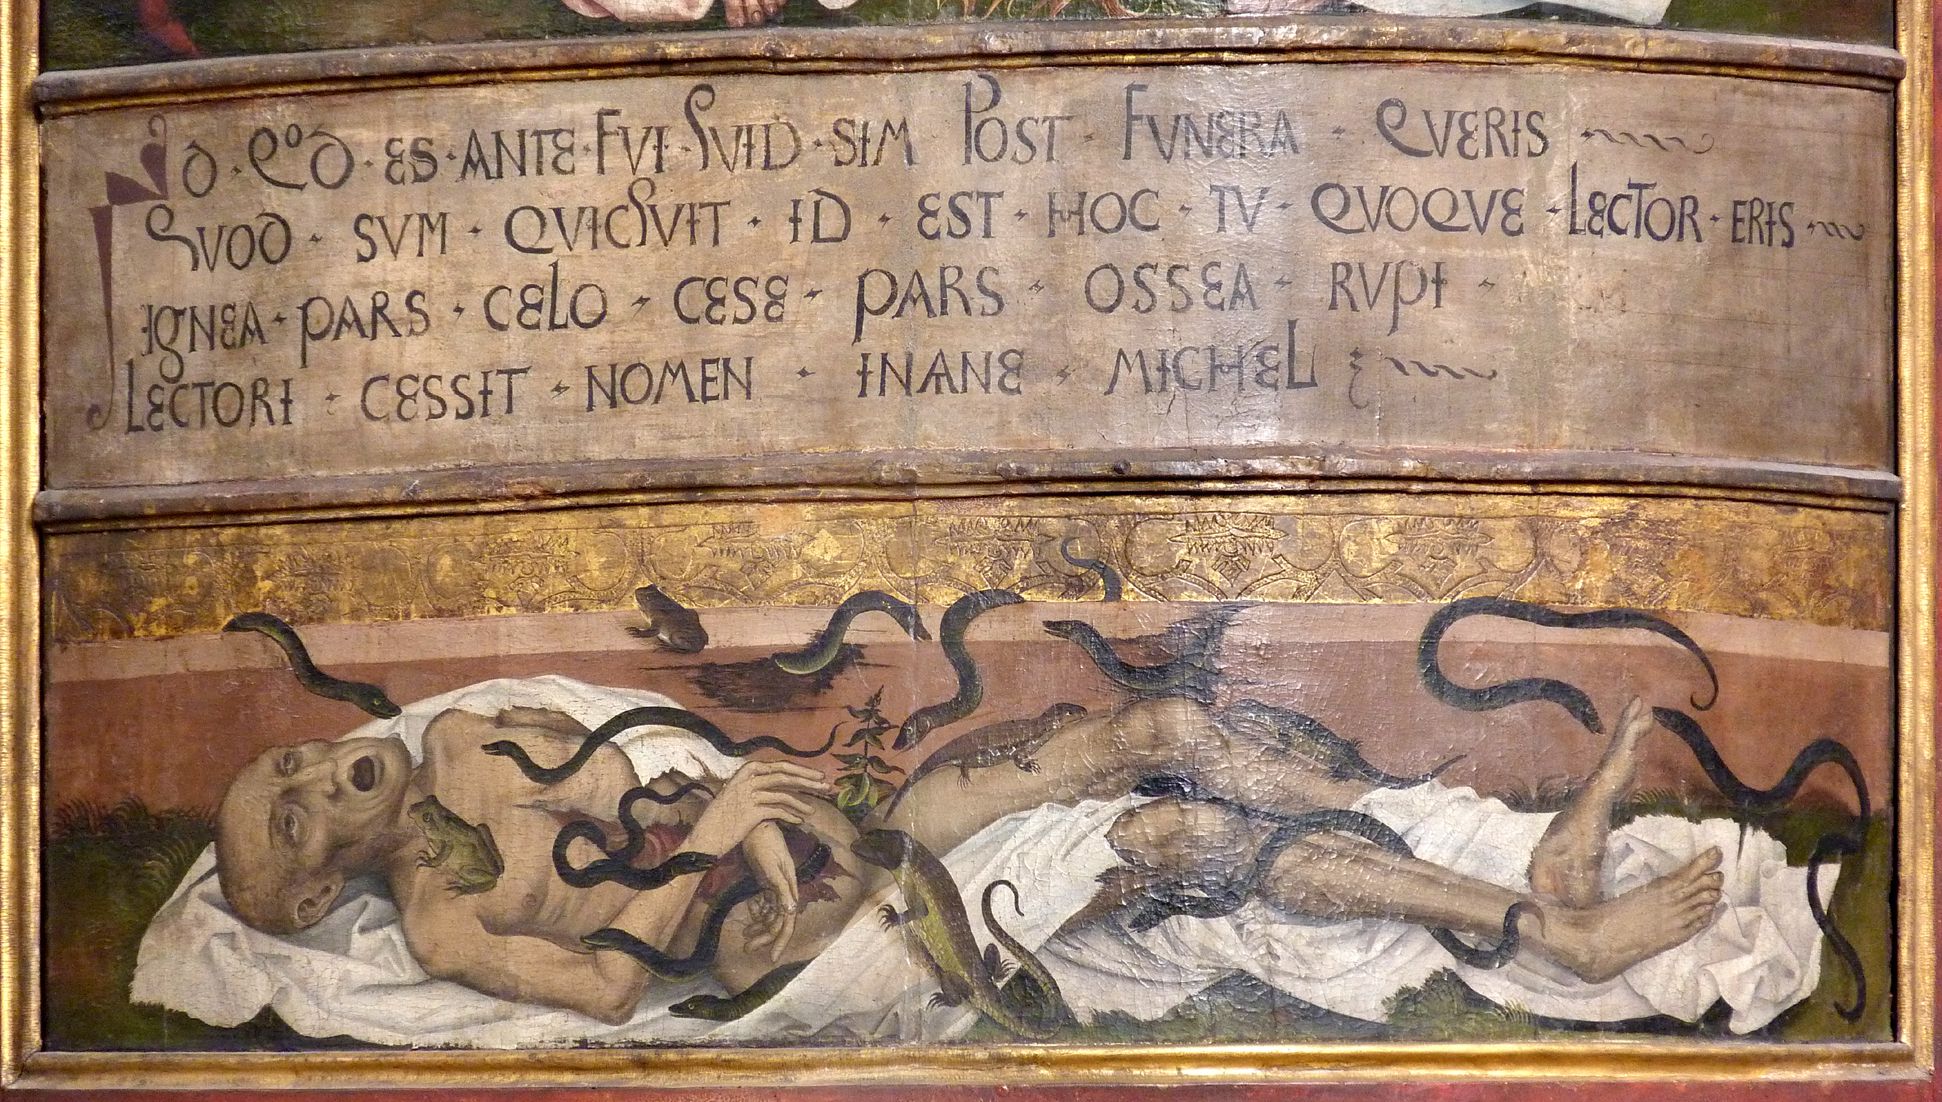 Epitaph for the Royal Chef de Cuisine Michael Raffael Inscription and dead body being eaten by worms